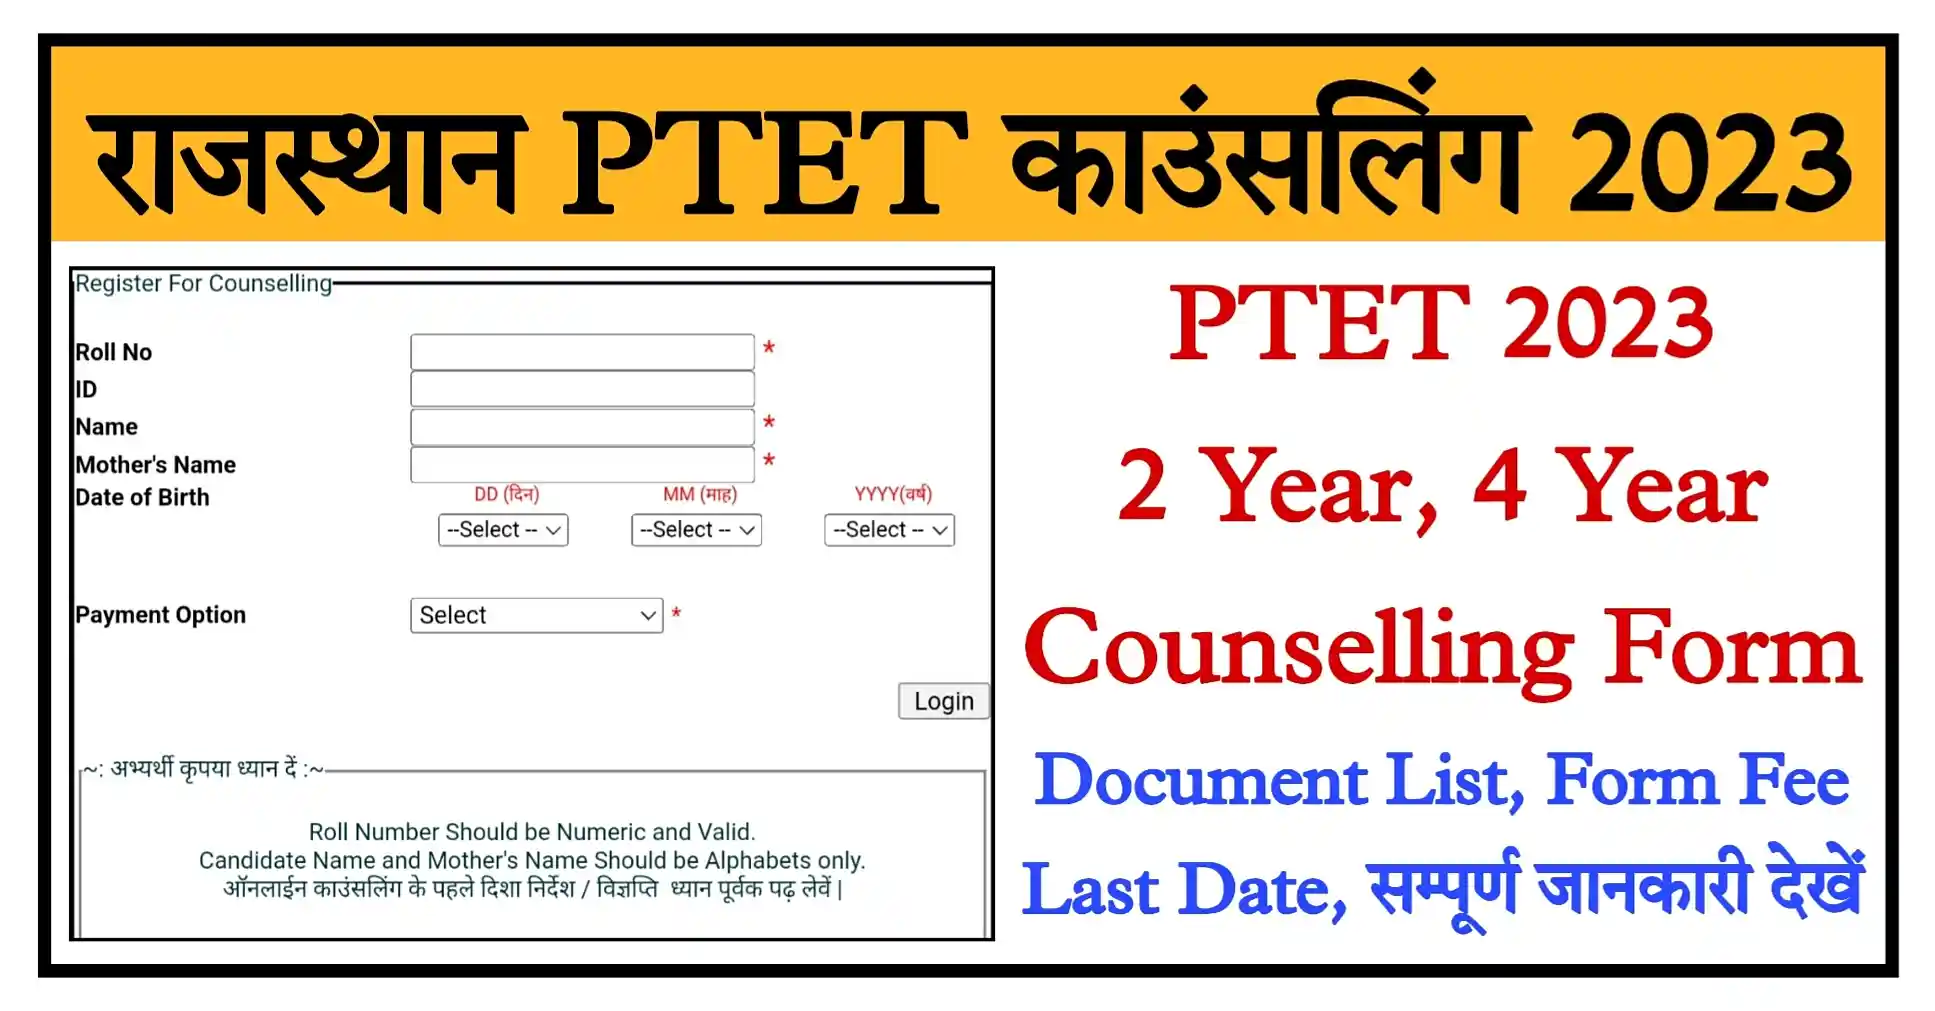 Rajasthan PTET Counselling 2023 Notification, Apply Online, Form Fee, Merit List 2 Year And 4 Year